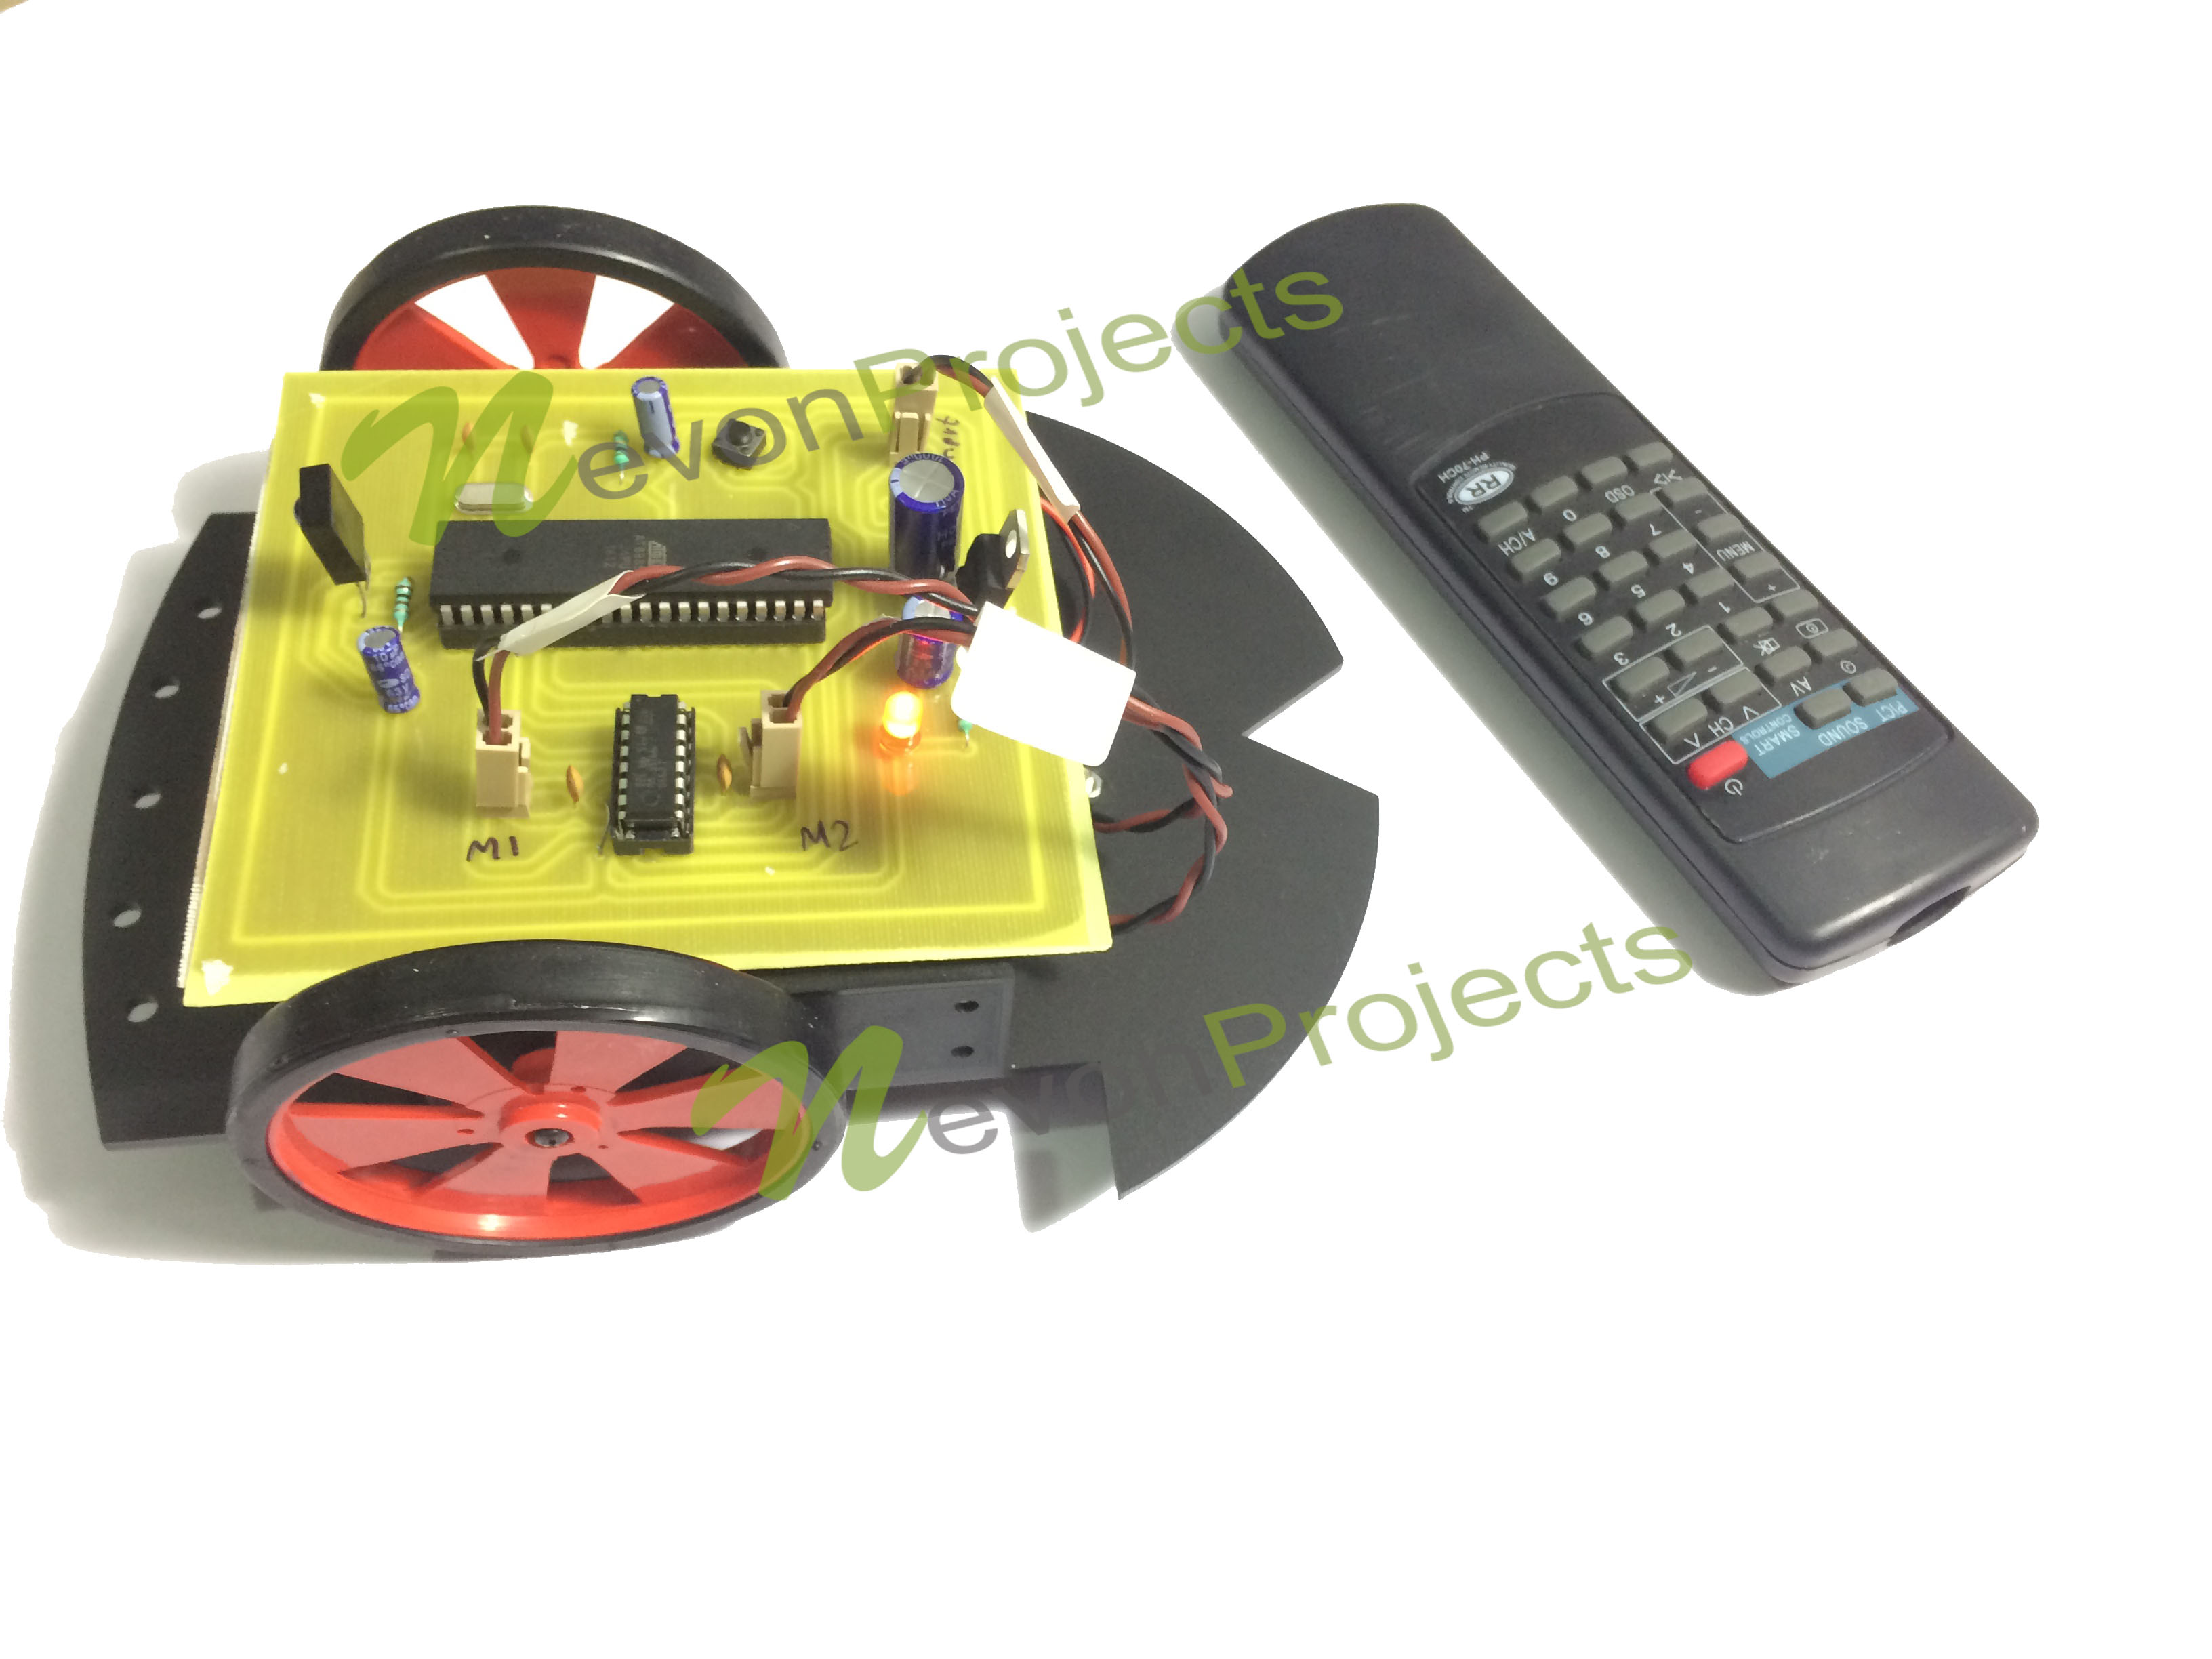 TV Remote Controlled Robotic Vehicle